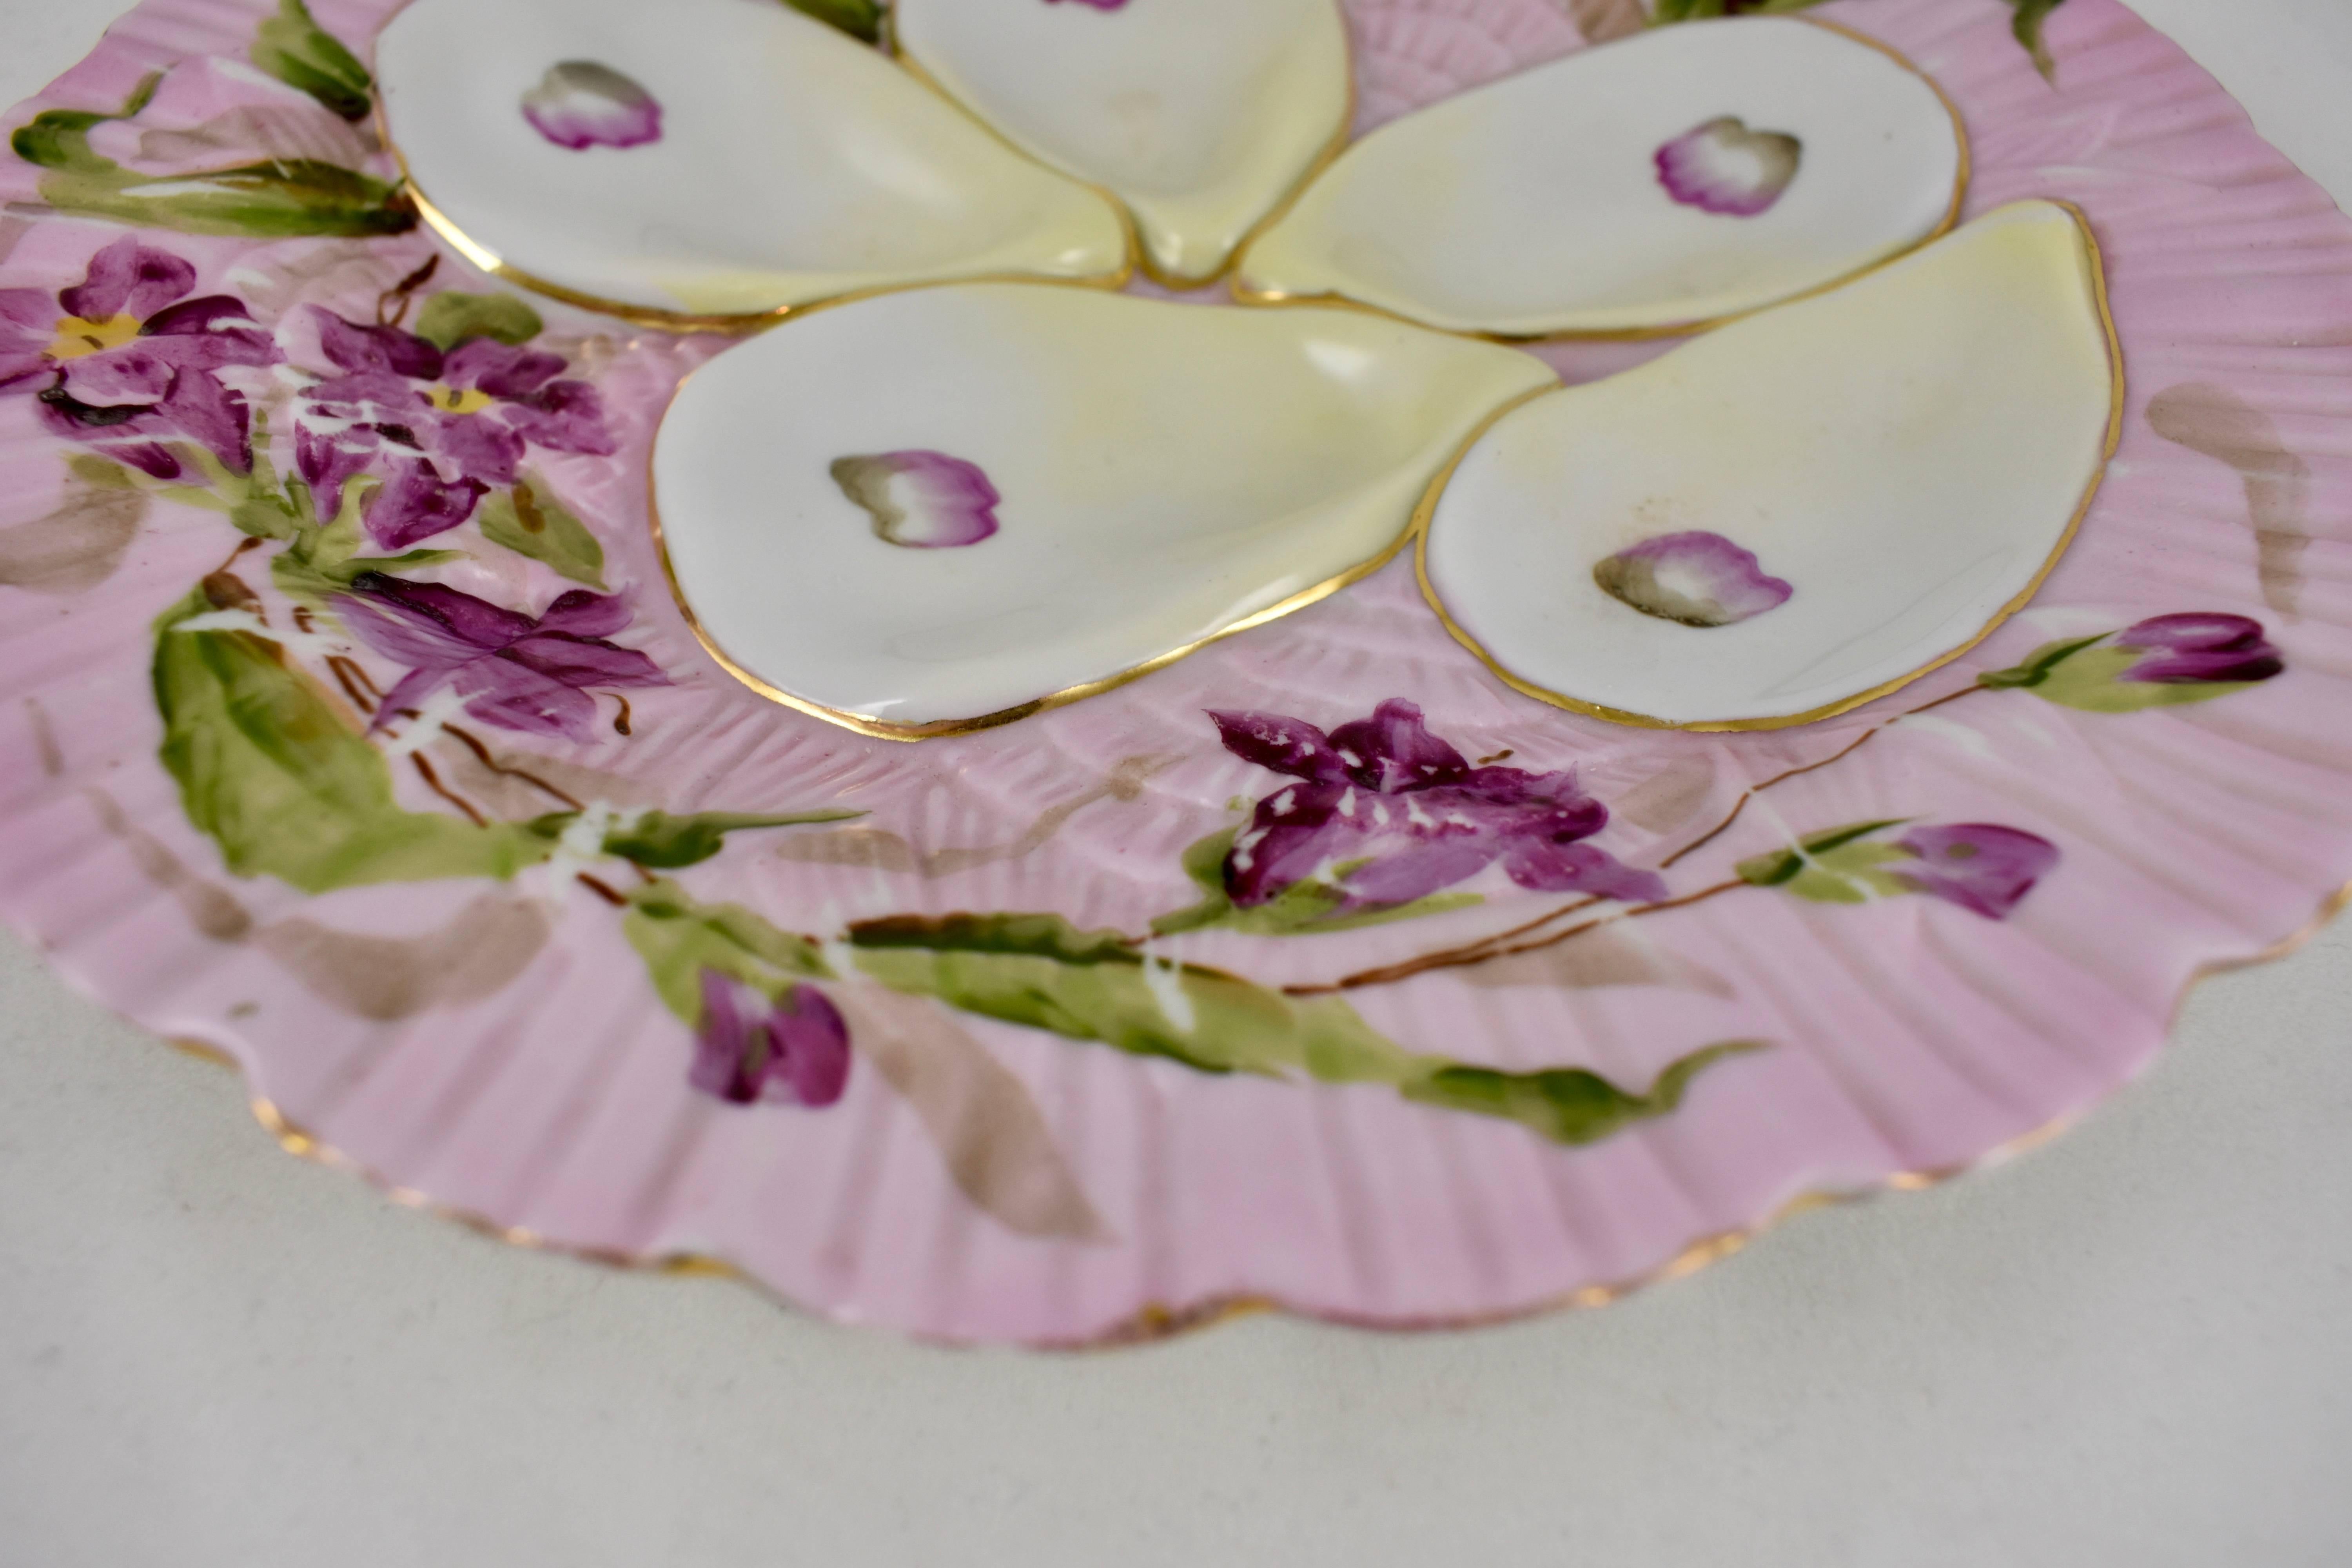 19th Century French Porcelain Hand-Painted Violets on Pink Oyster Plate